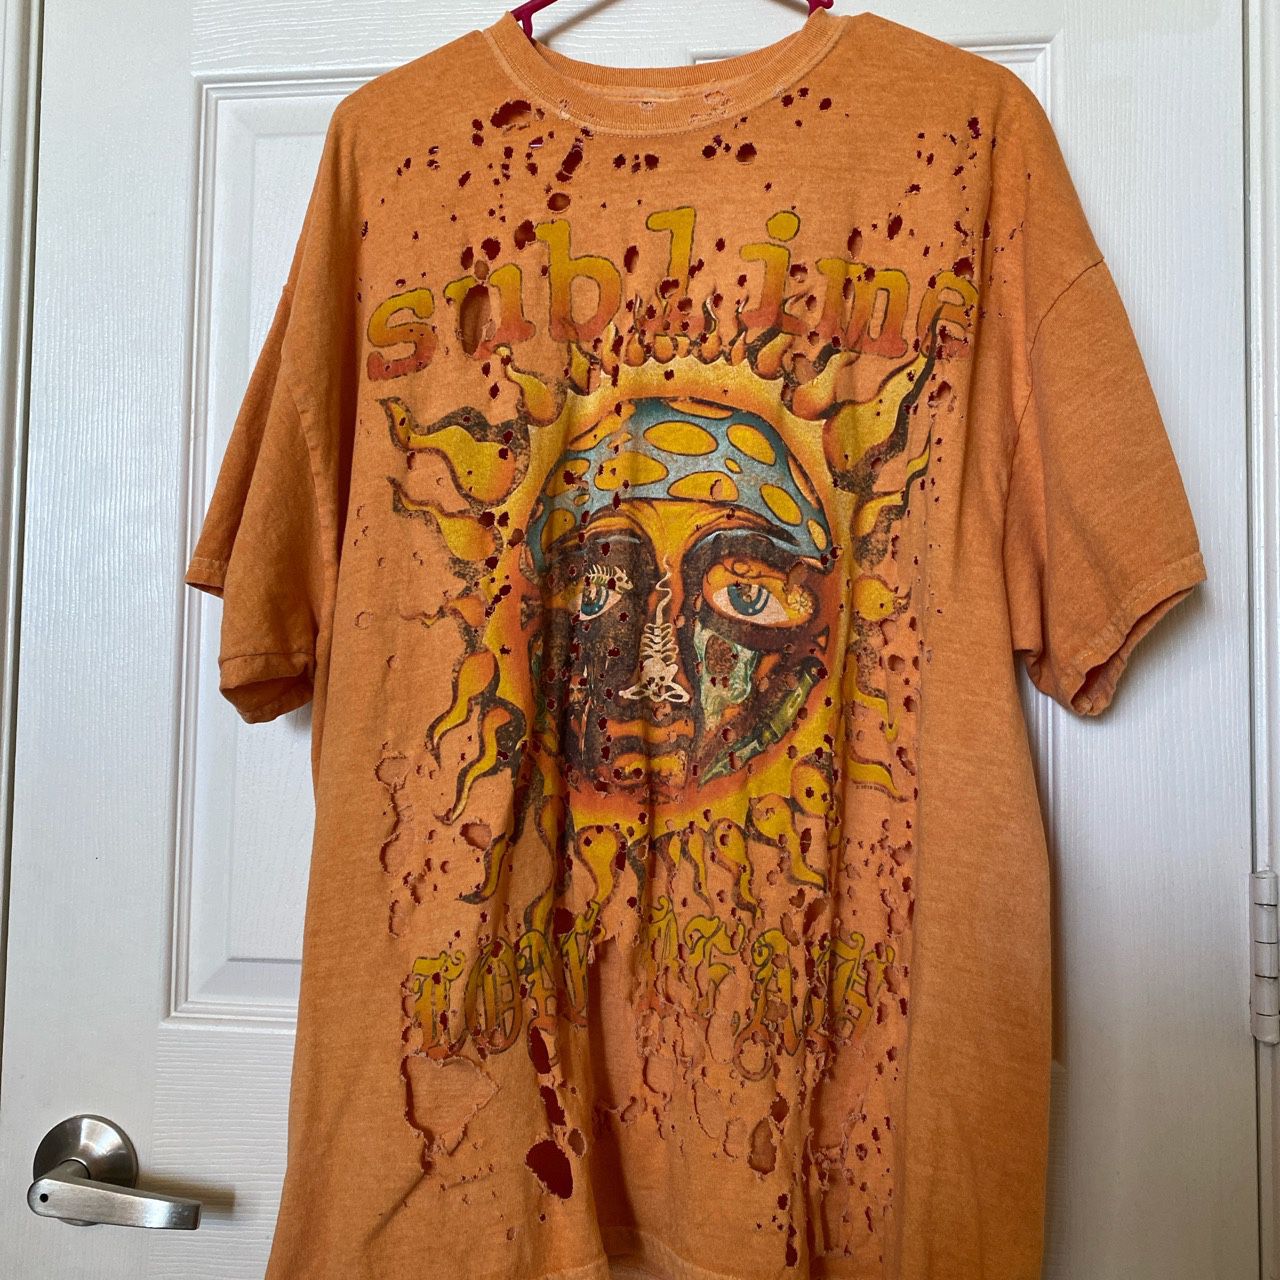 Urban Outfitters Sublime Tee